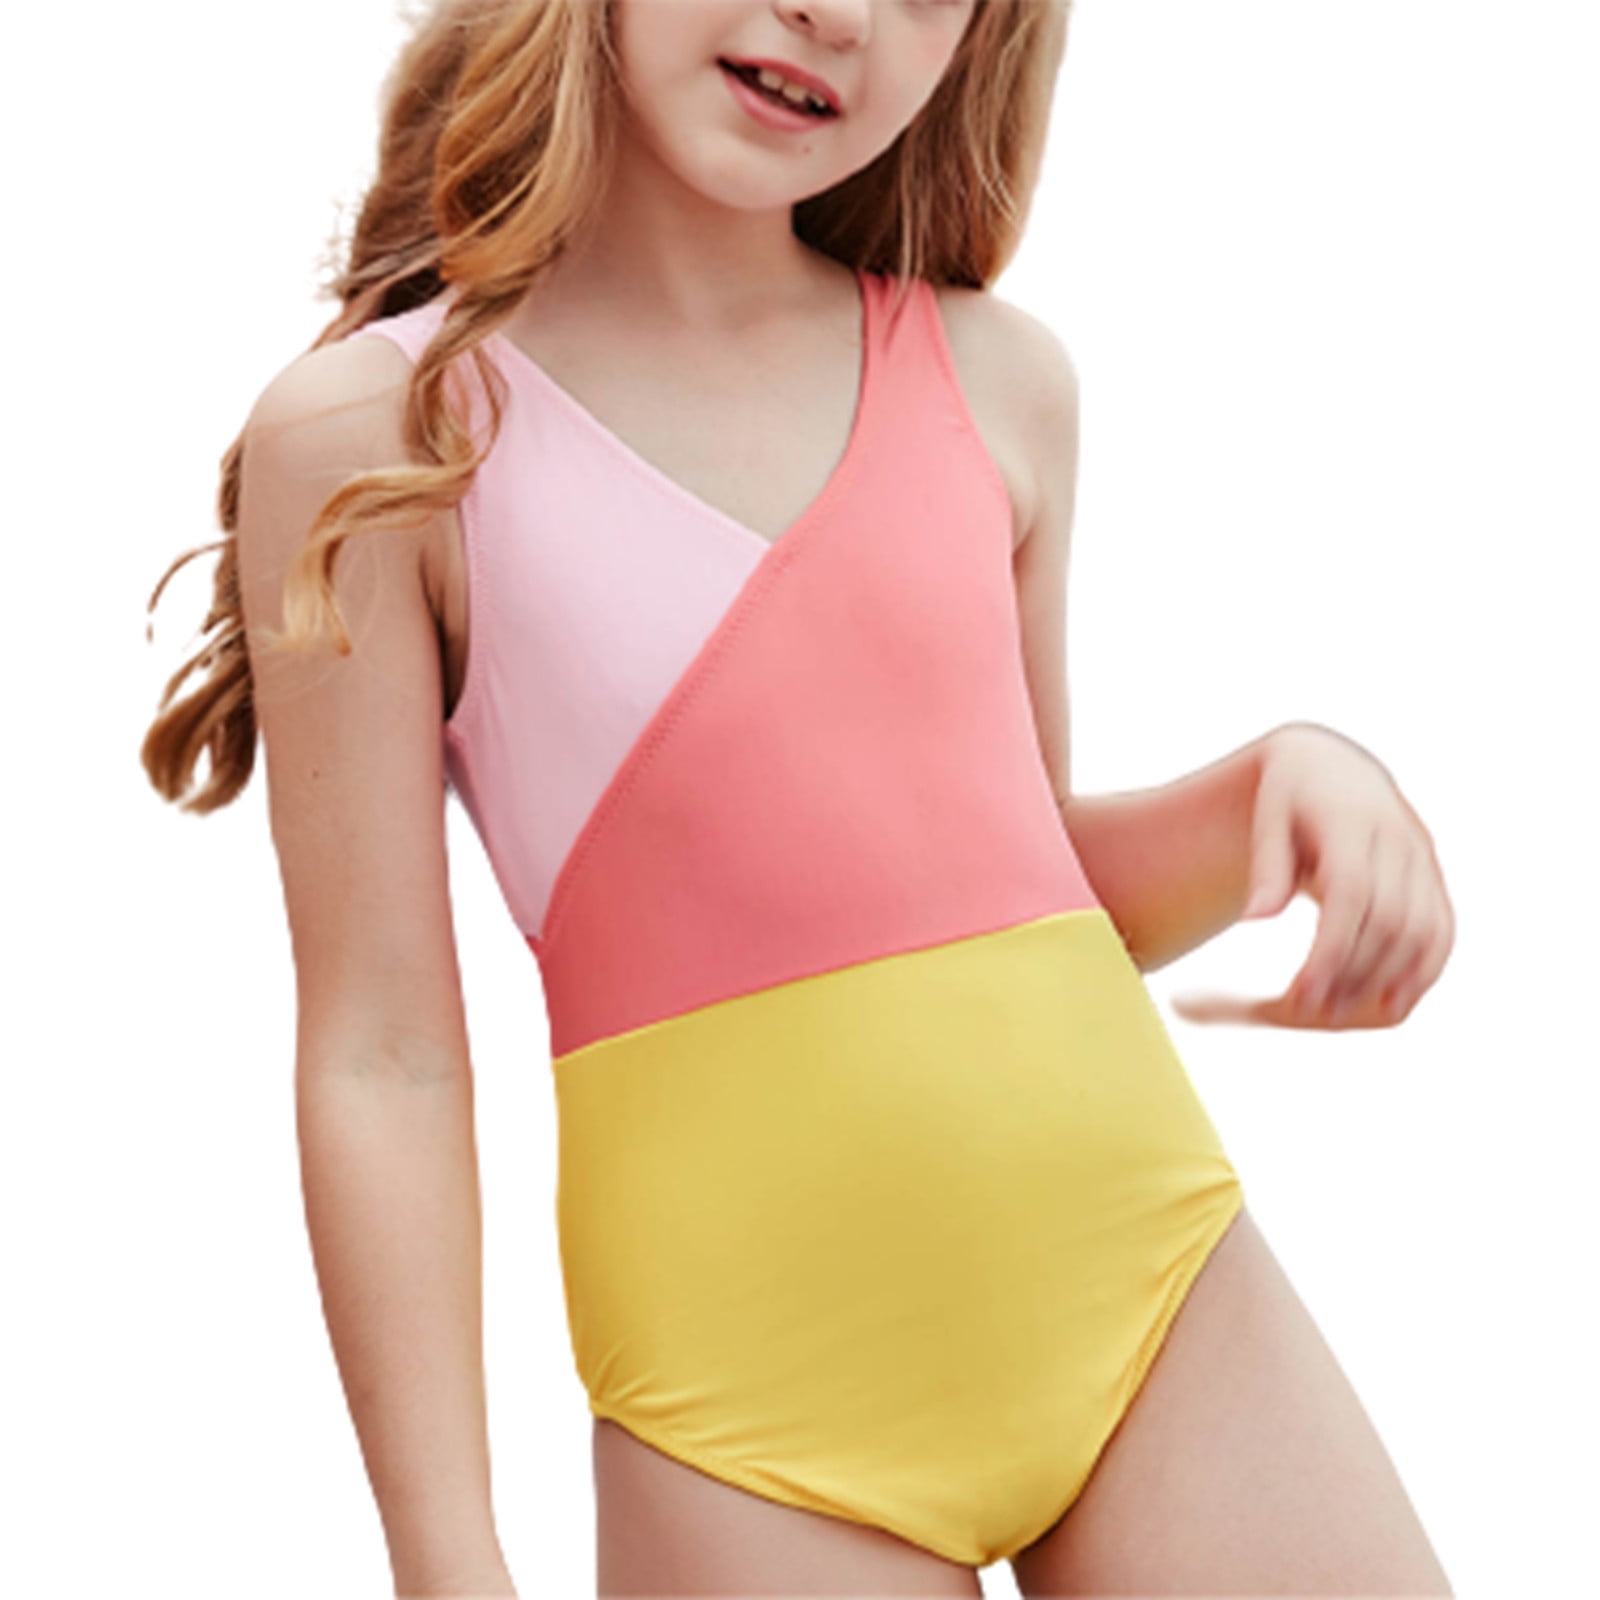 NKOOGH Girls Plus Size Swimsuits 18-20 Kids Preppy Bathing Suit Piece One  Girls Matching Holiday Cutecolor Bikini Bathing Set Swimsuit Swimwear Girls